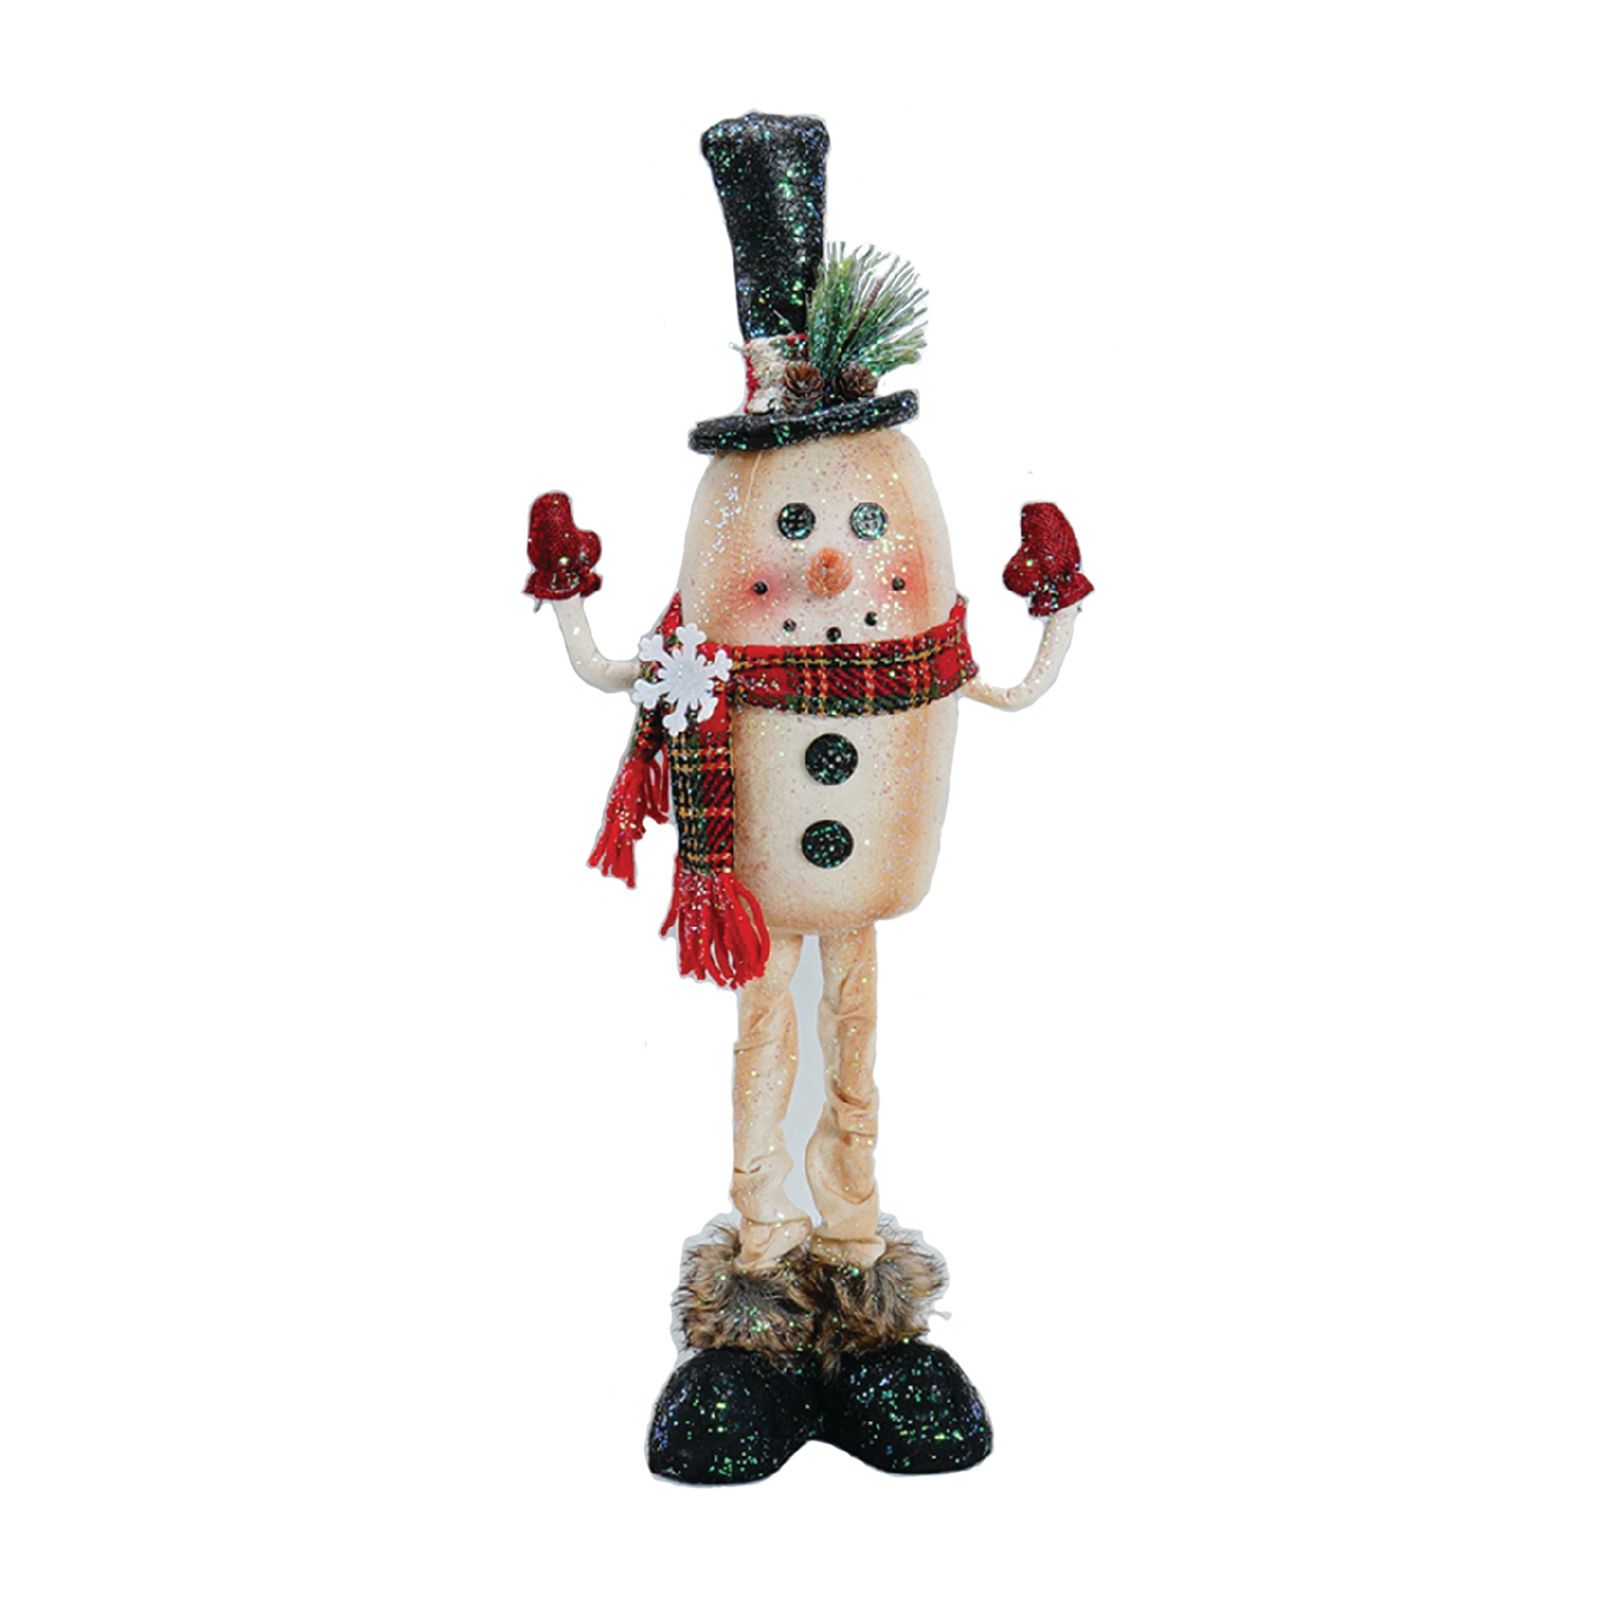 CC Christmas Decor 19" Beige and Red Glittery Snowman Handstitched Christmas Plush Figure